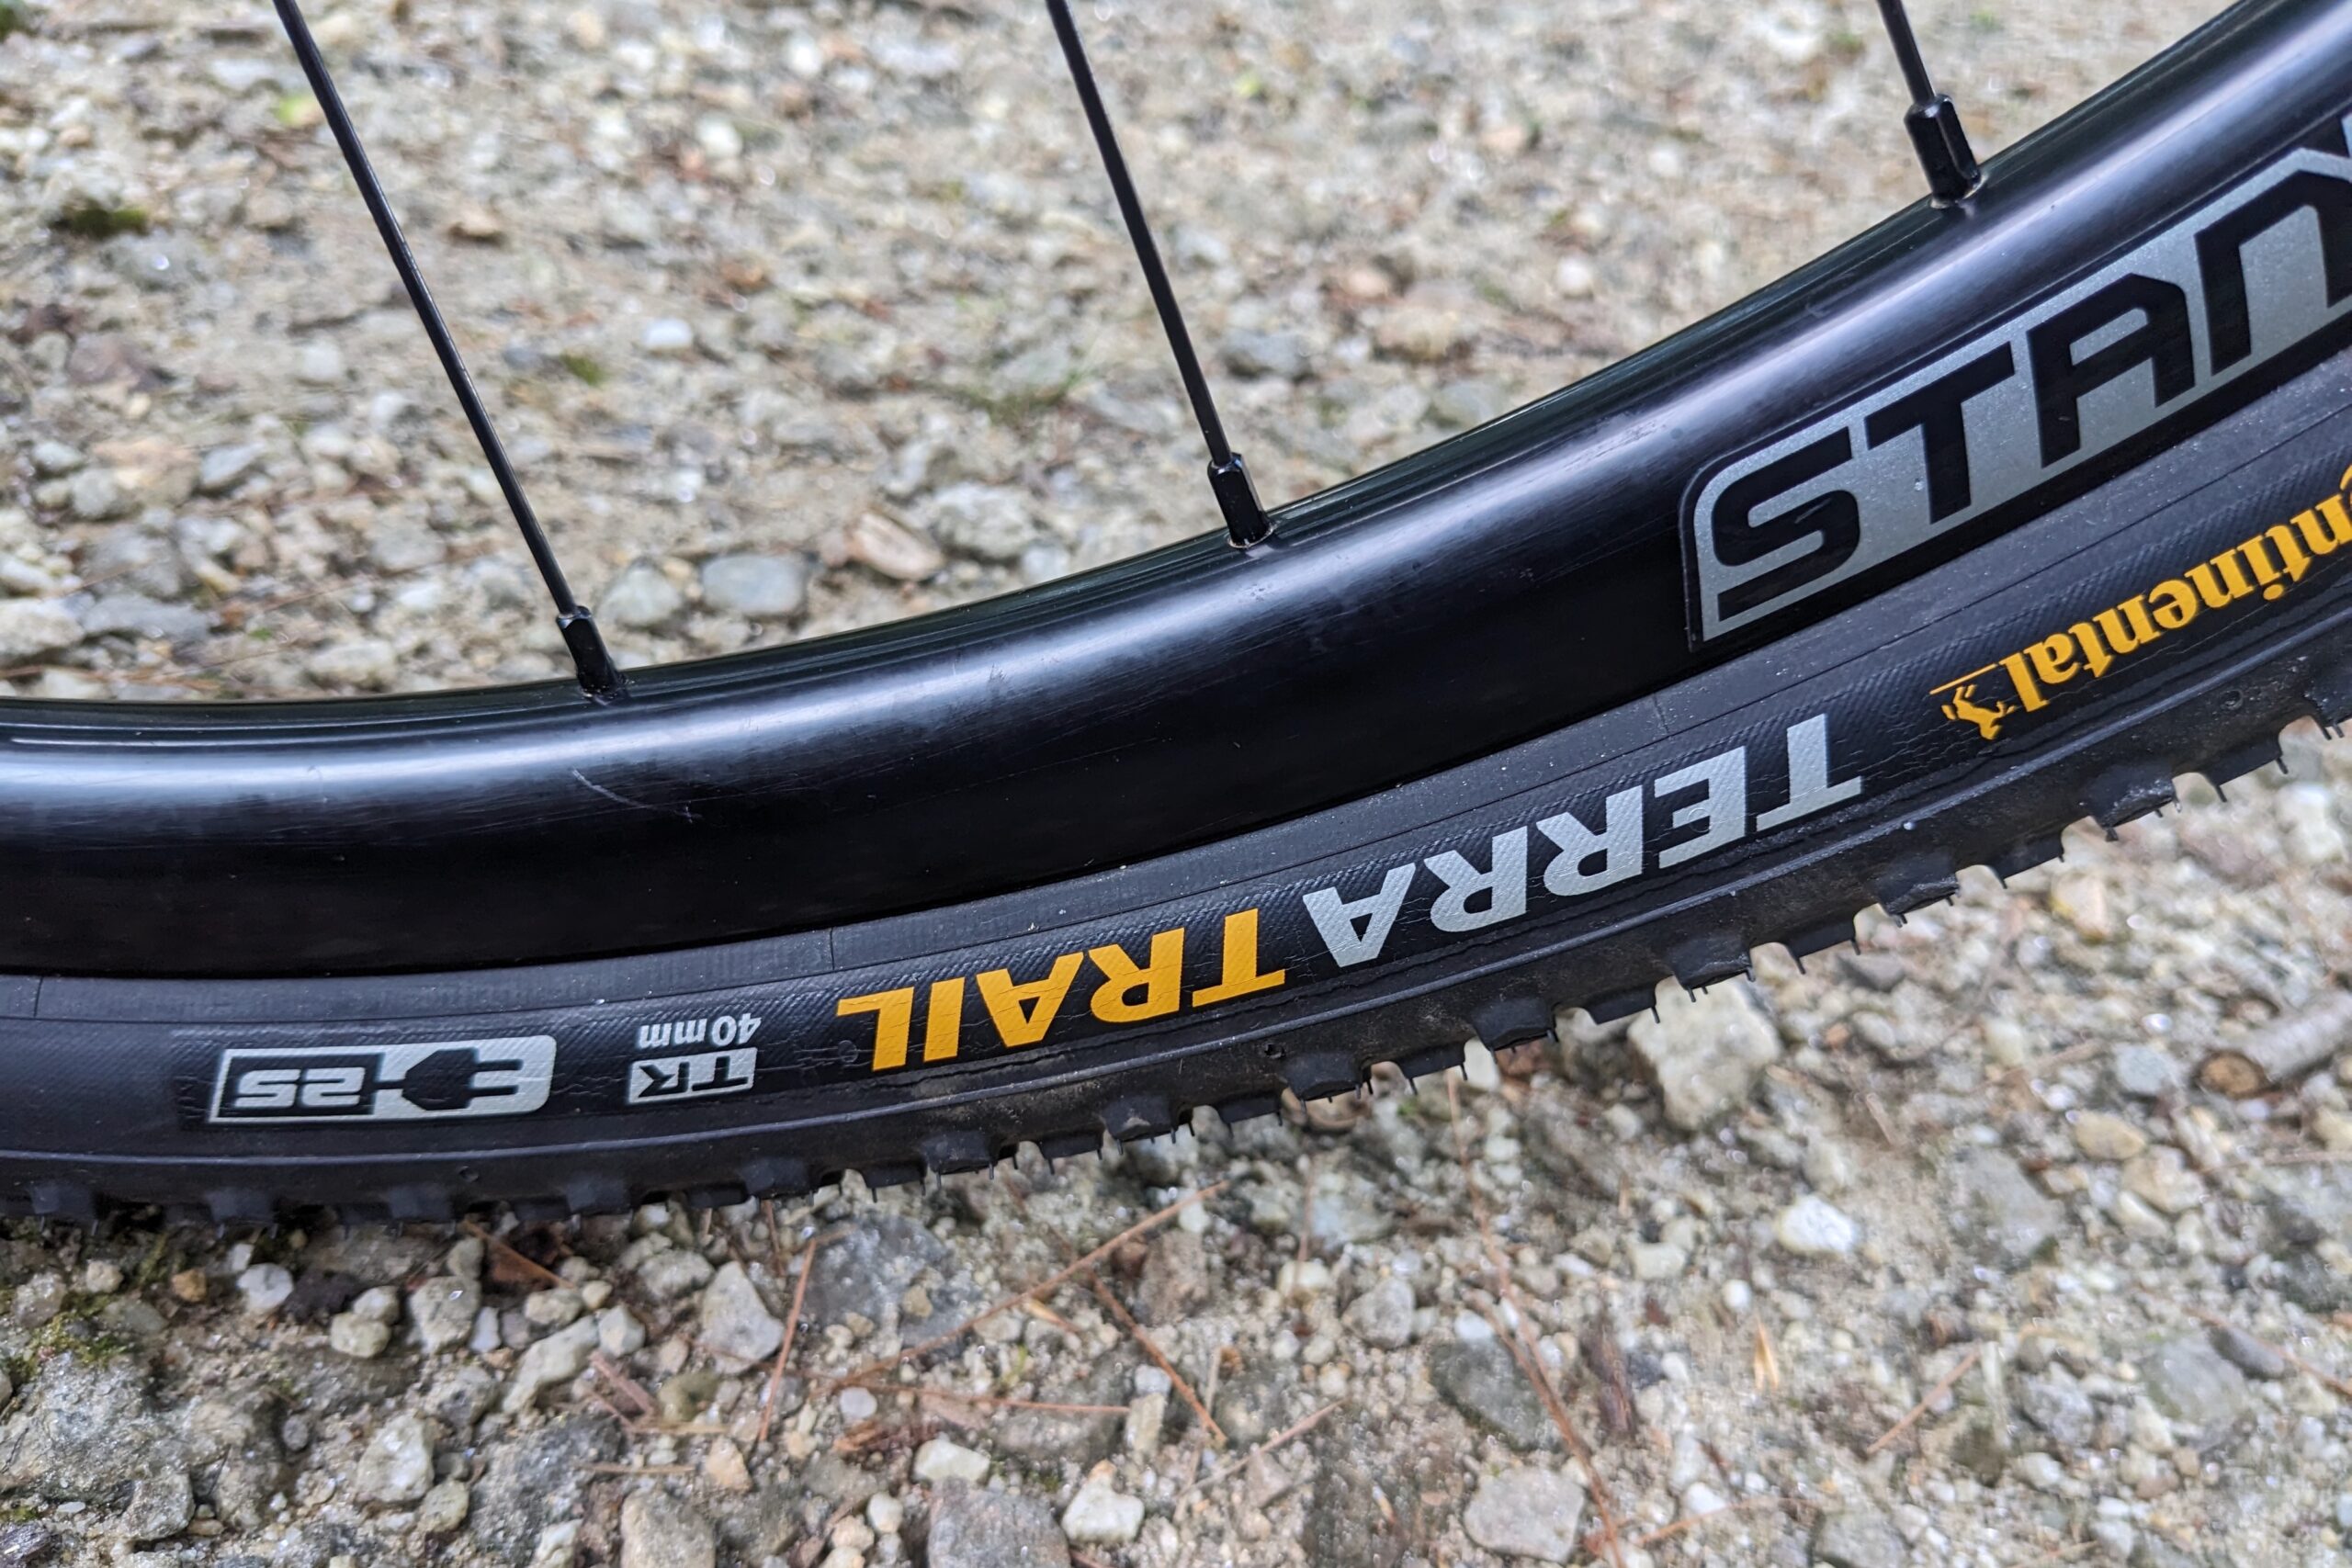 The hot patch on the side of a gravel bike tire